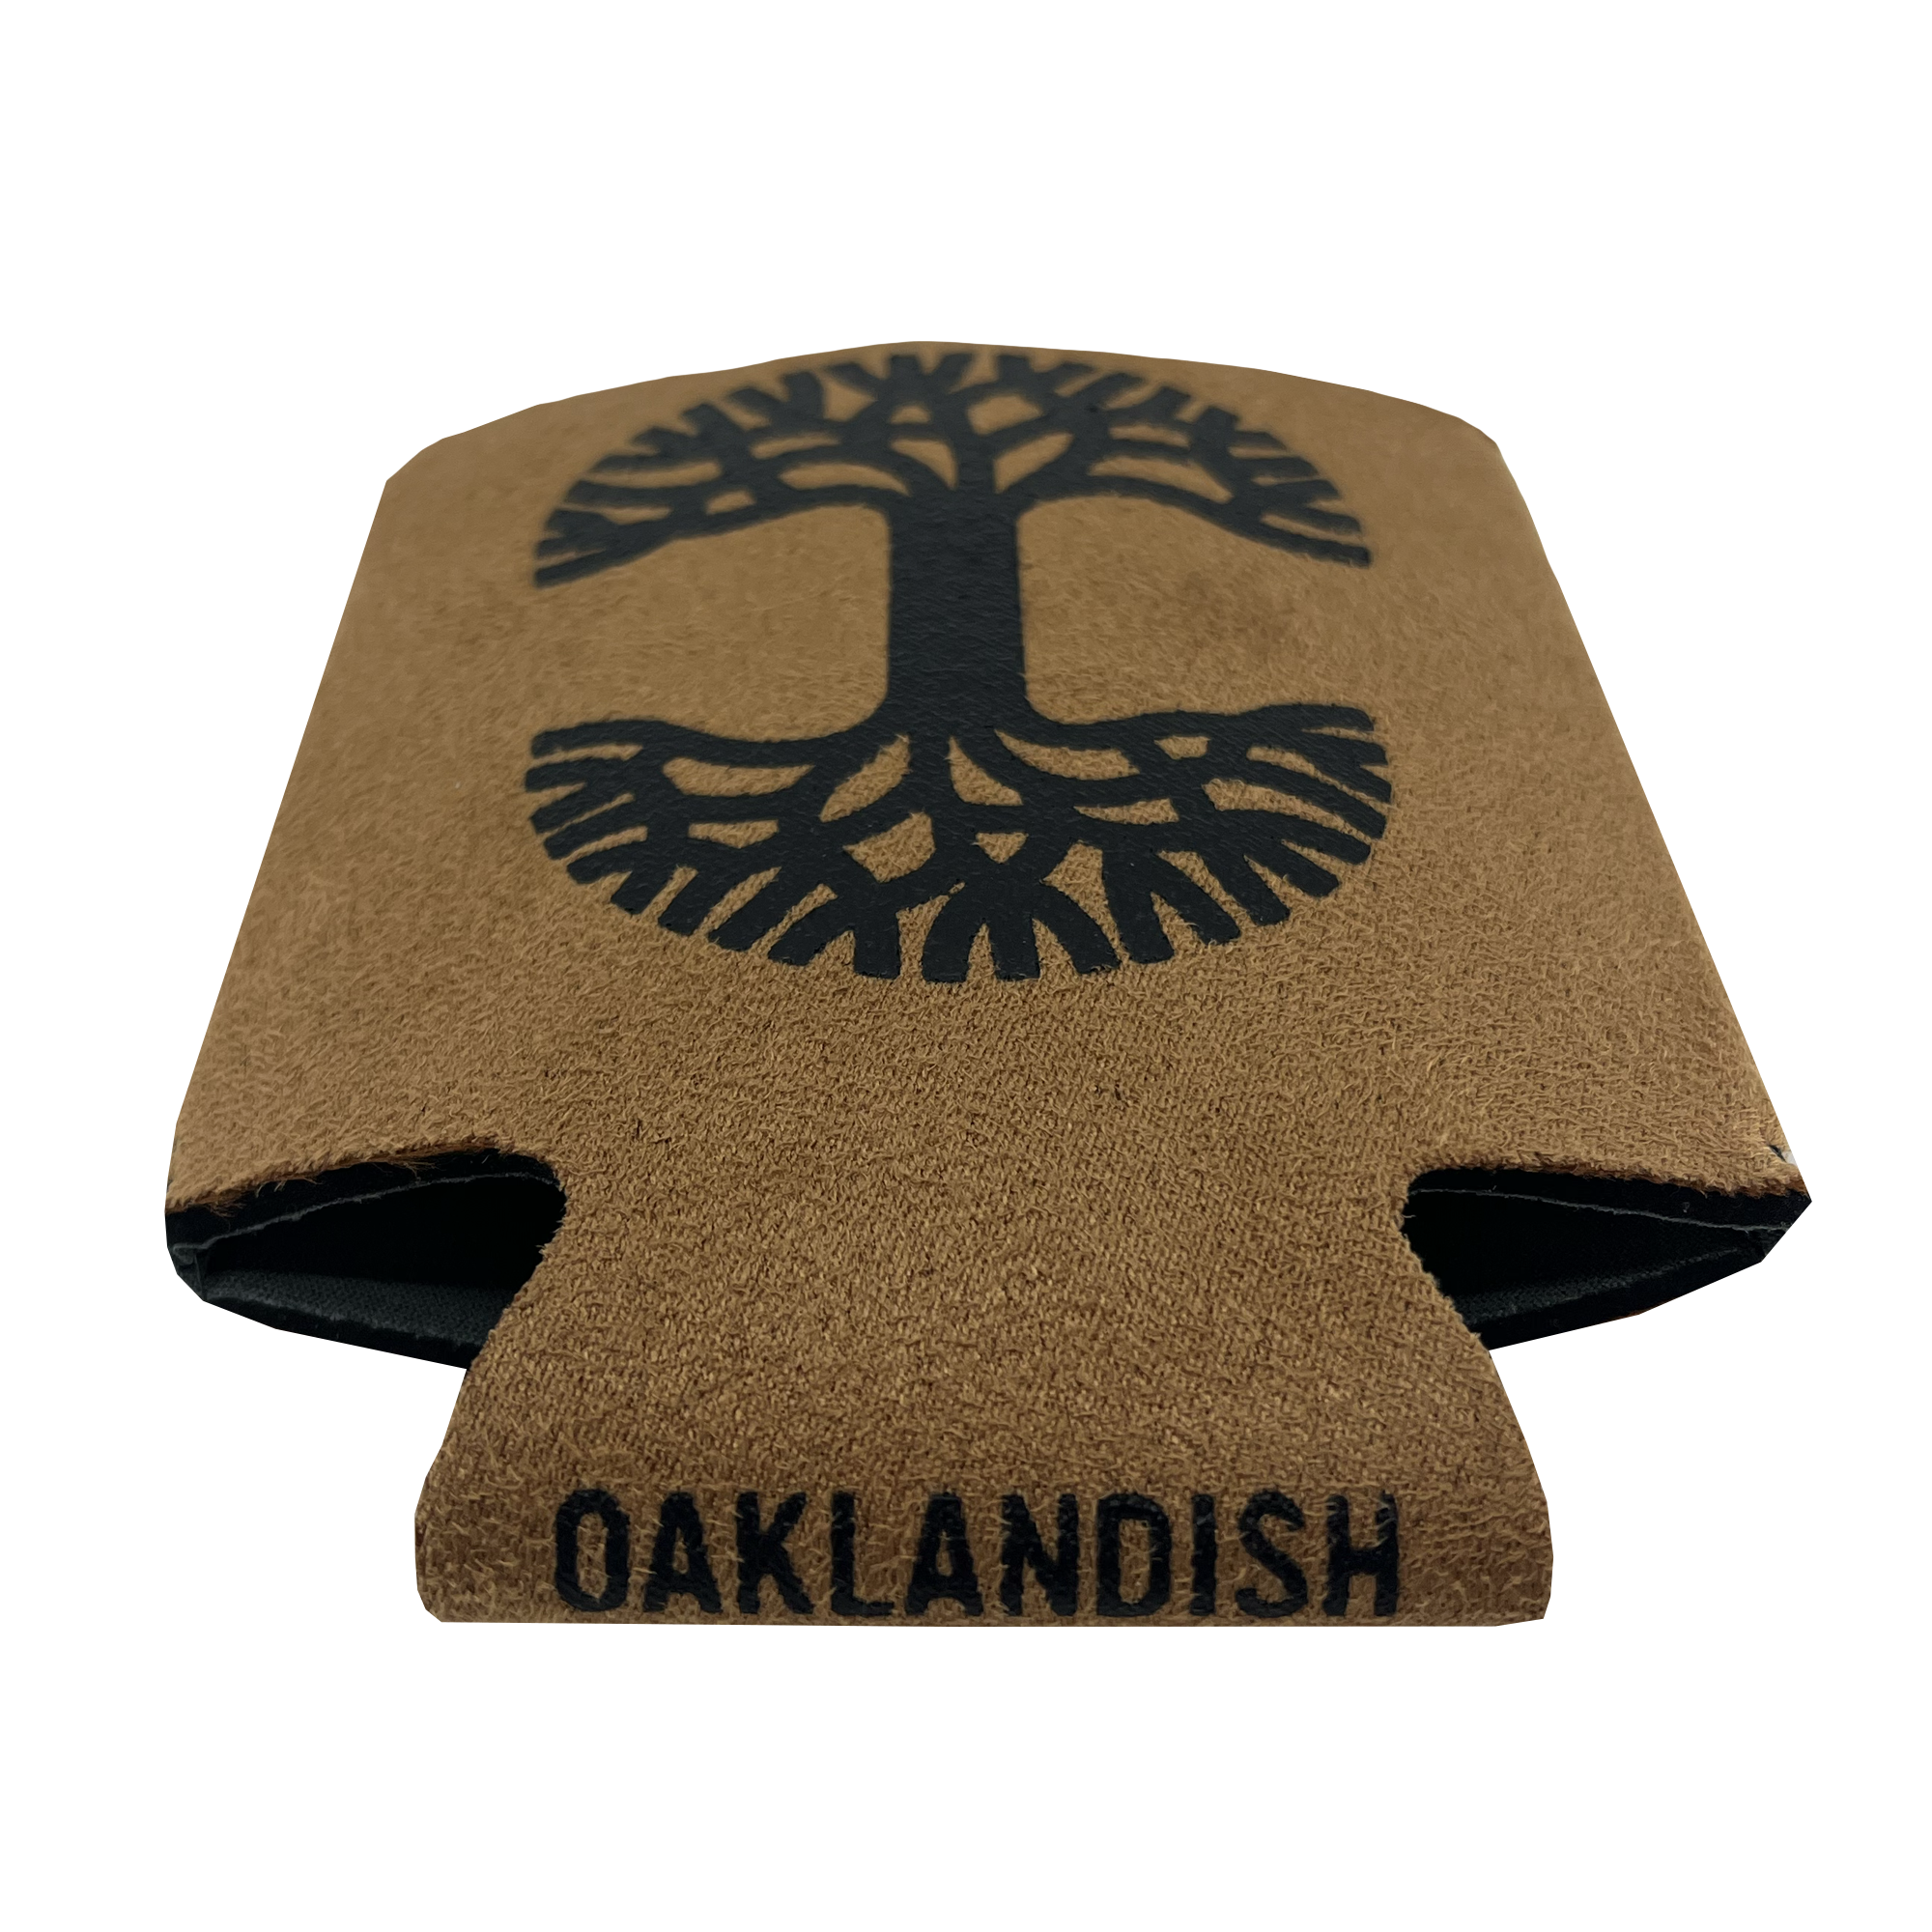 Flat underside of suede feeling brown can cooler drink sleeve with OAKLANDISH tree logo on side and OAKLANDISH wordmark on the bottom.